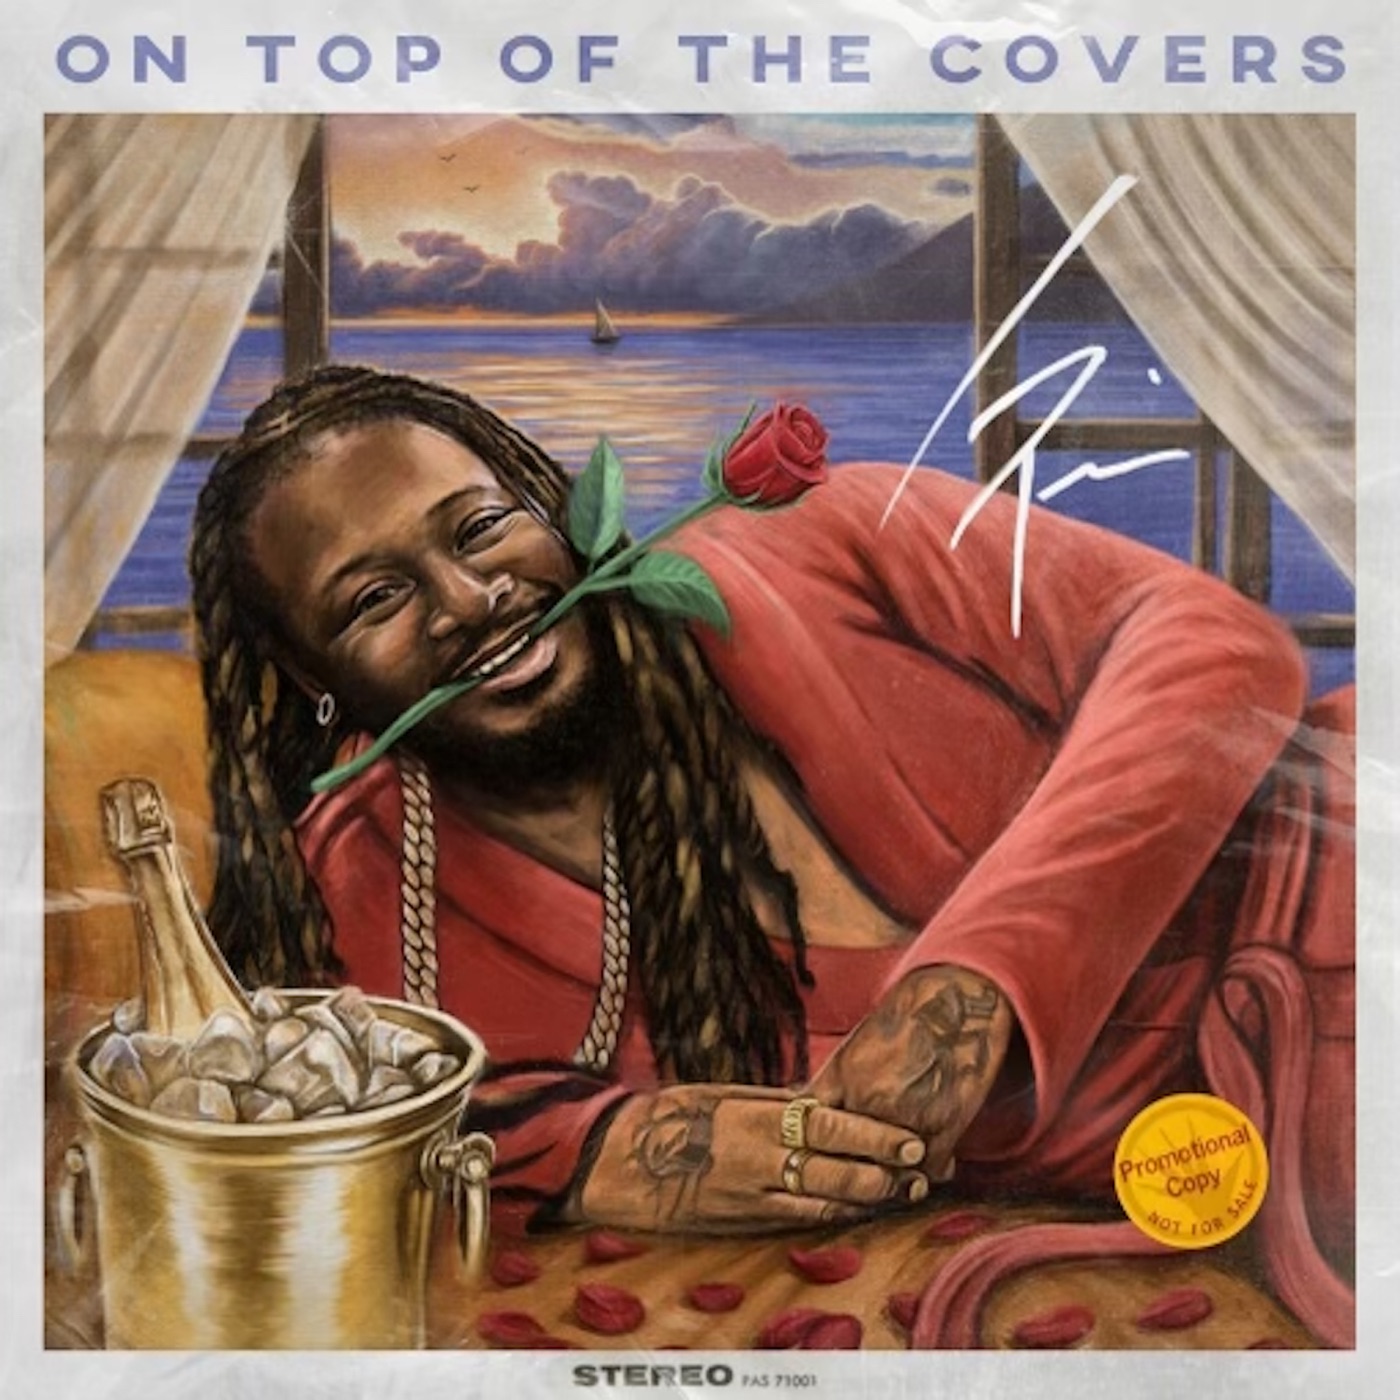 On Top of The Covers by T-Pain